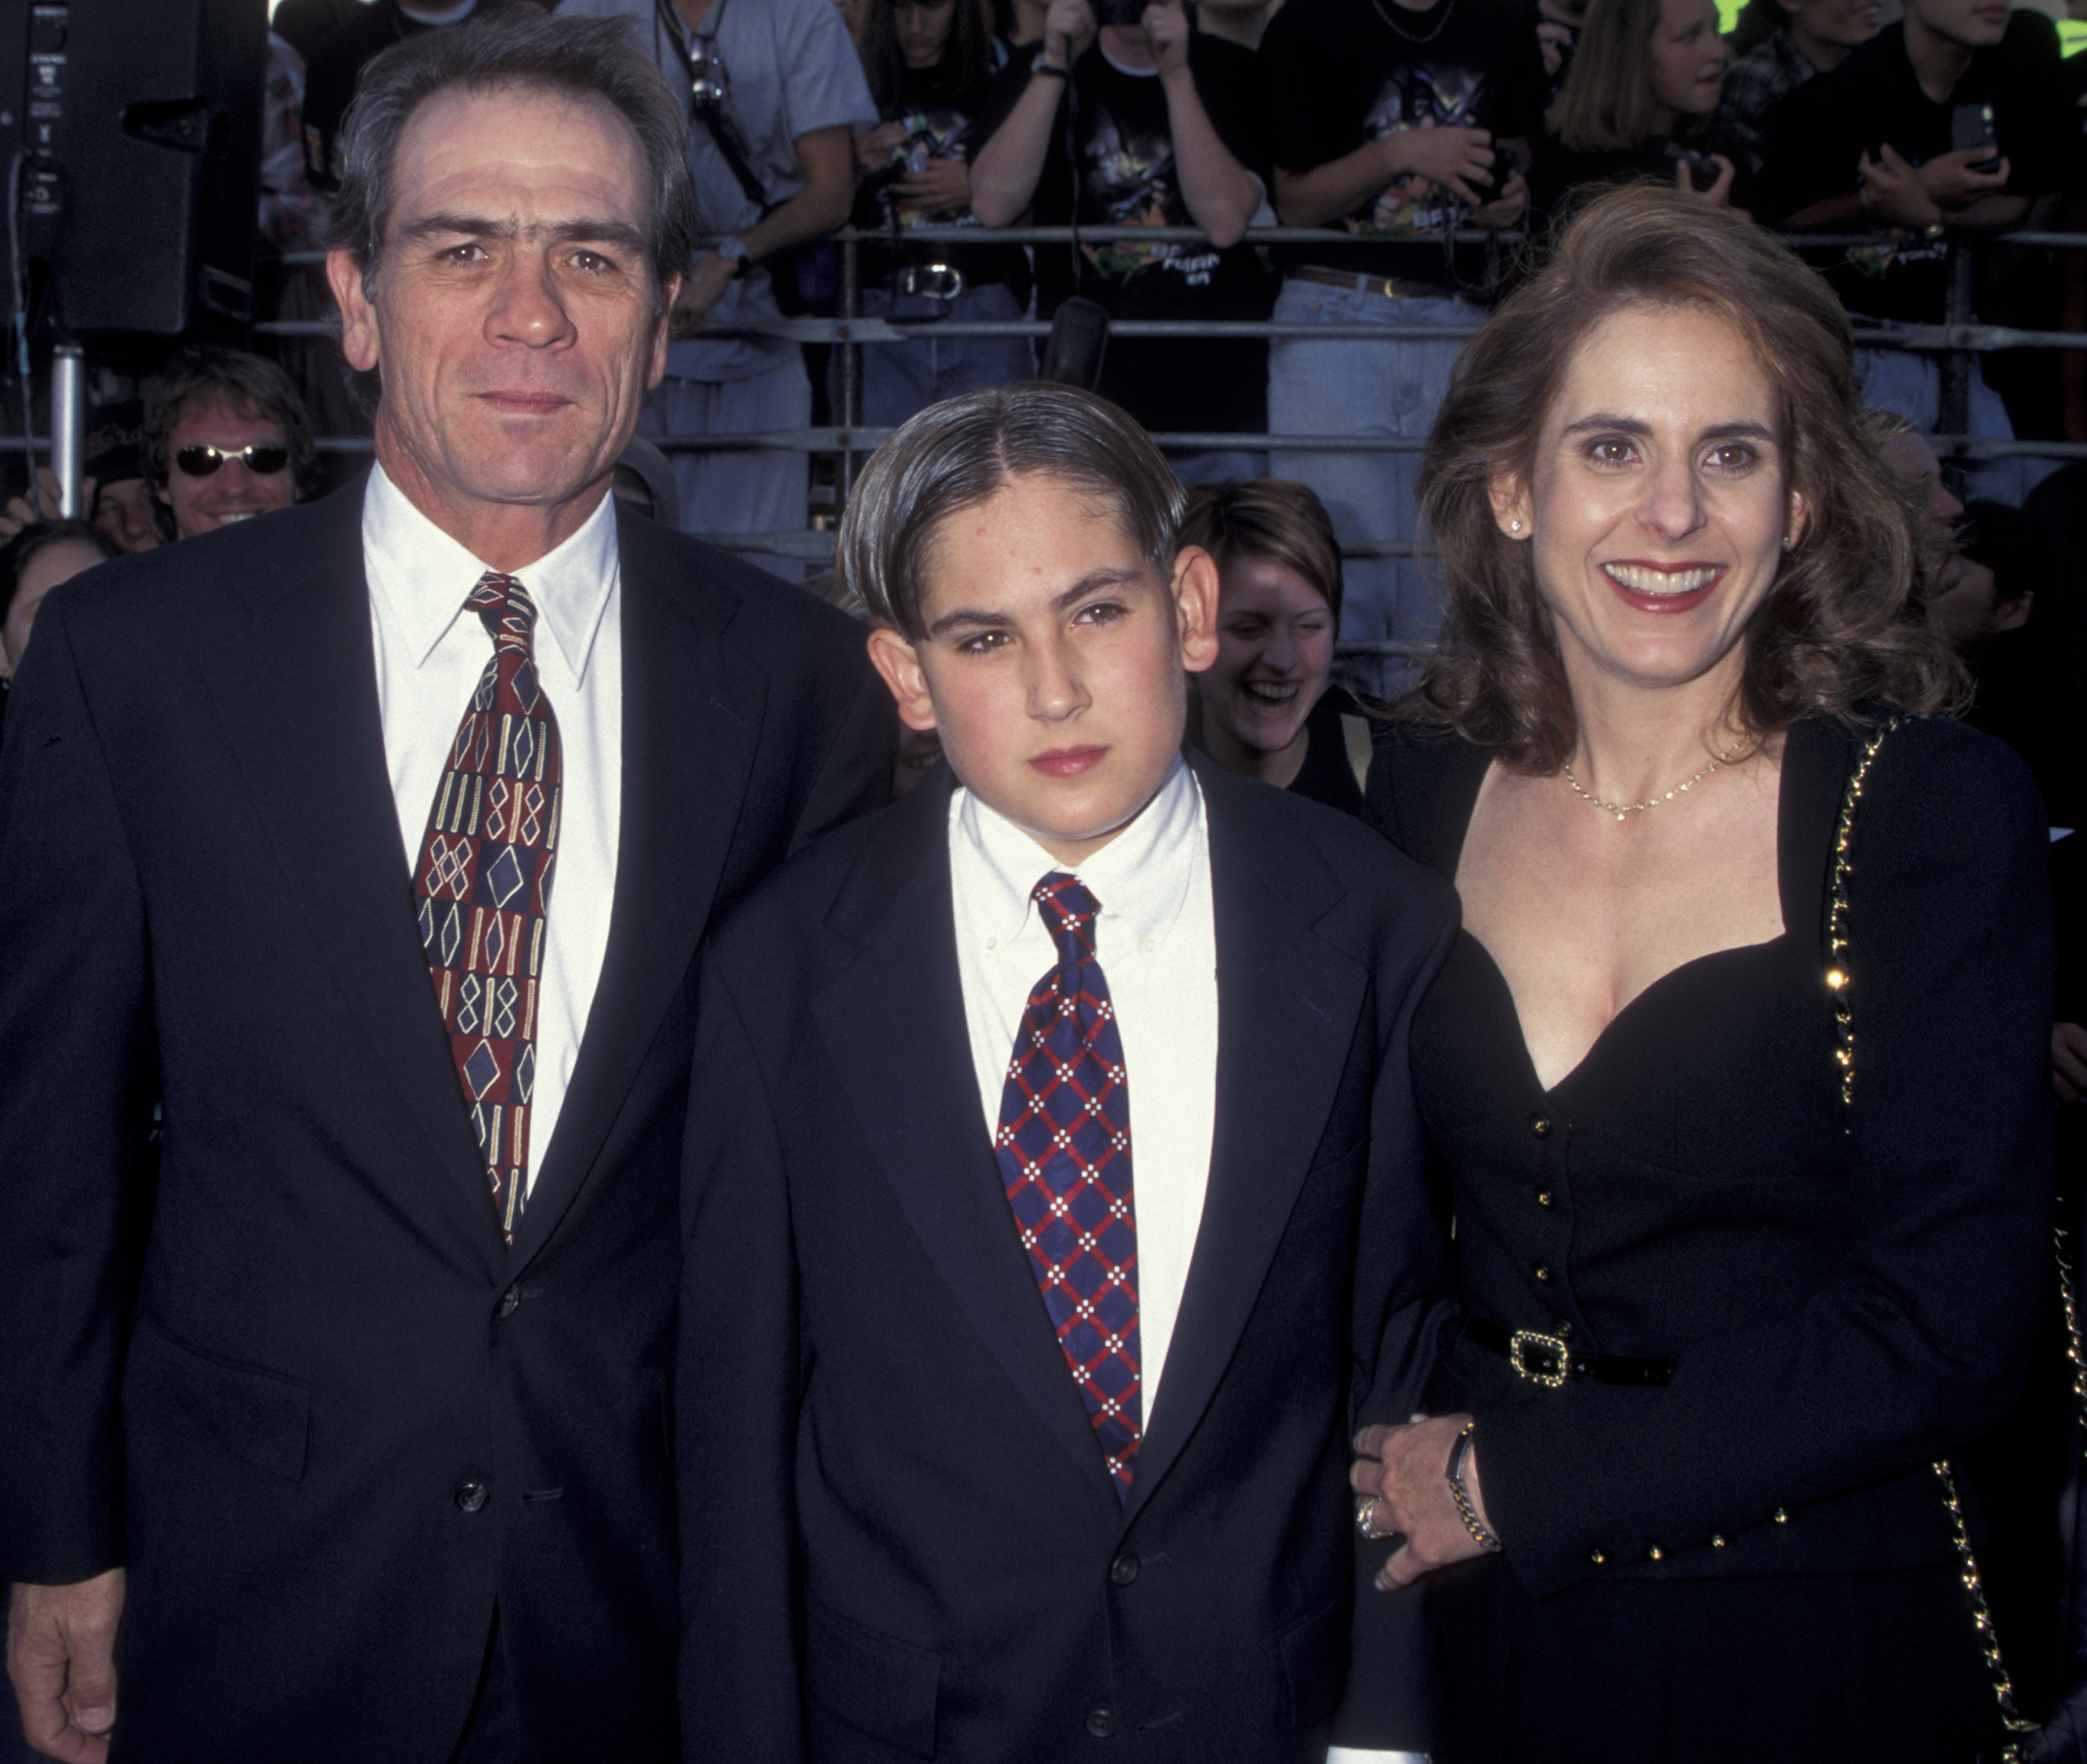 Tommy Lee Jones, his wife Kimberlea, and their son Austin, at the world premiere of "Batman Forever" on June 9, 1995, in Westwood, California | Source: Getty Images